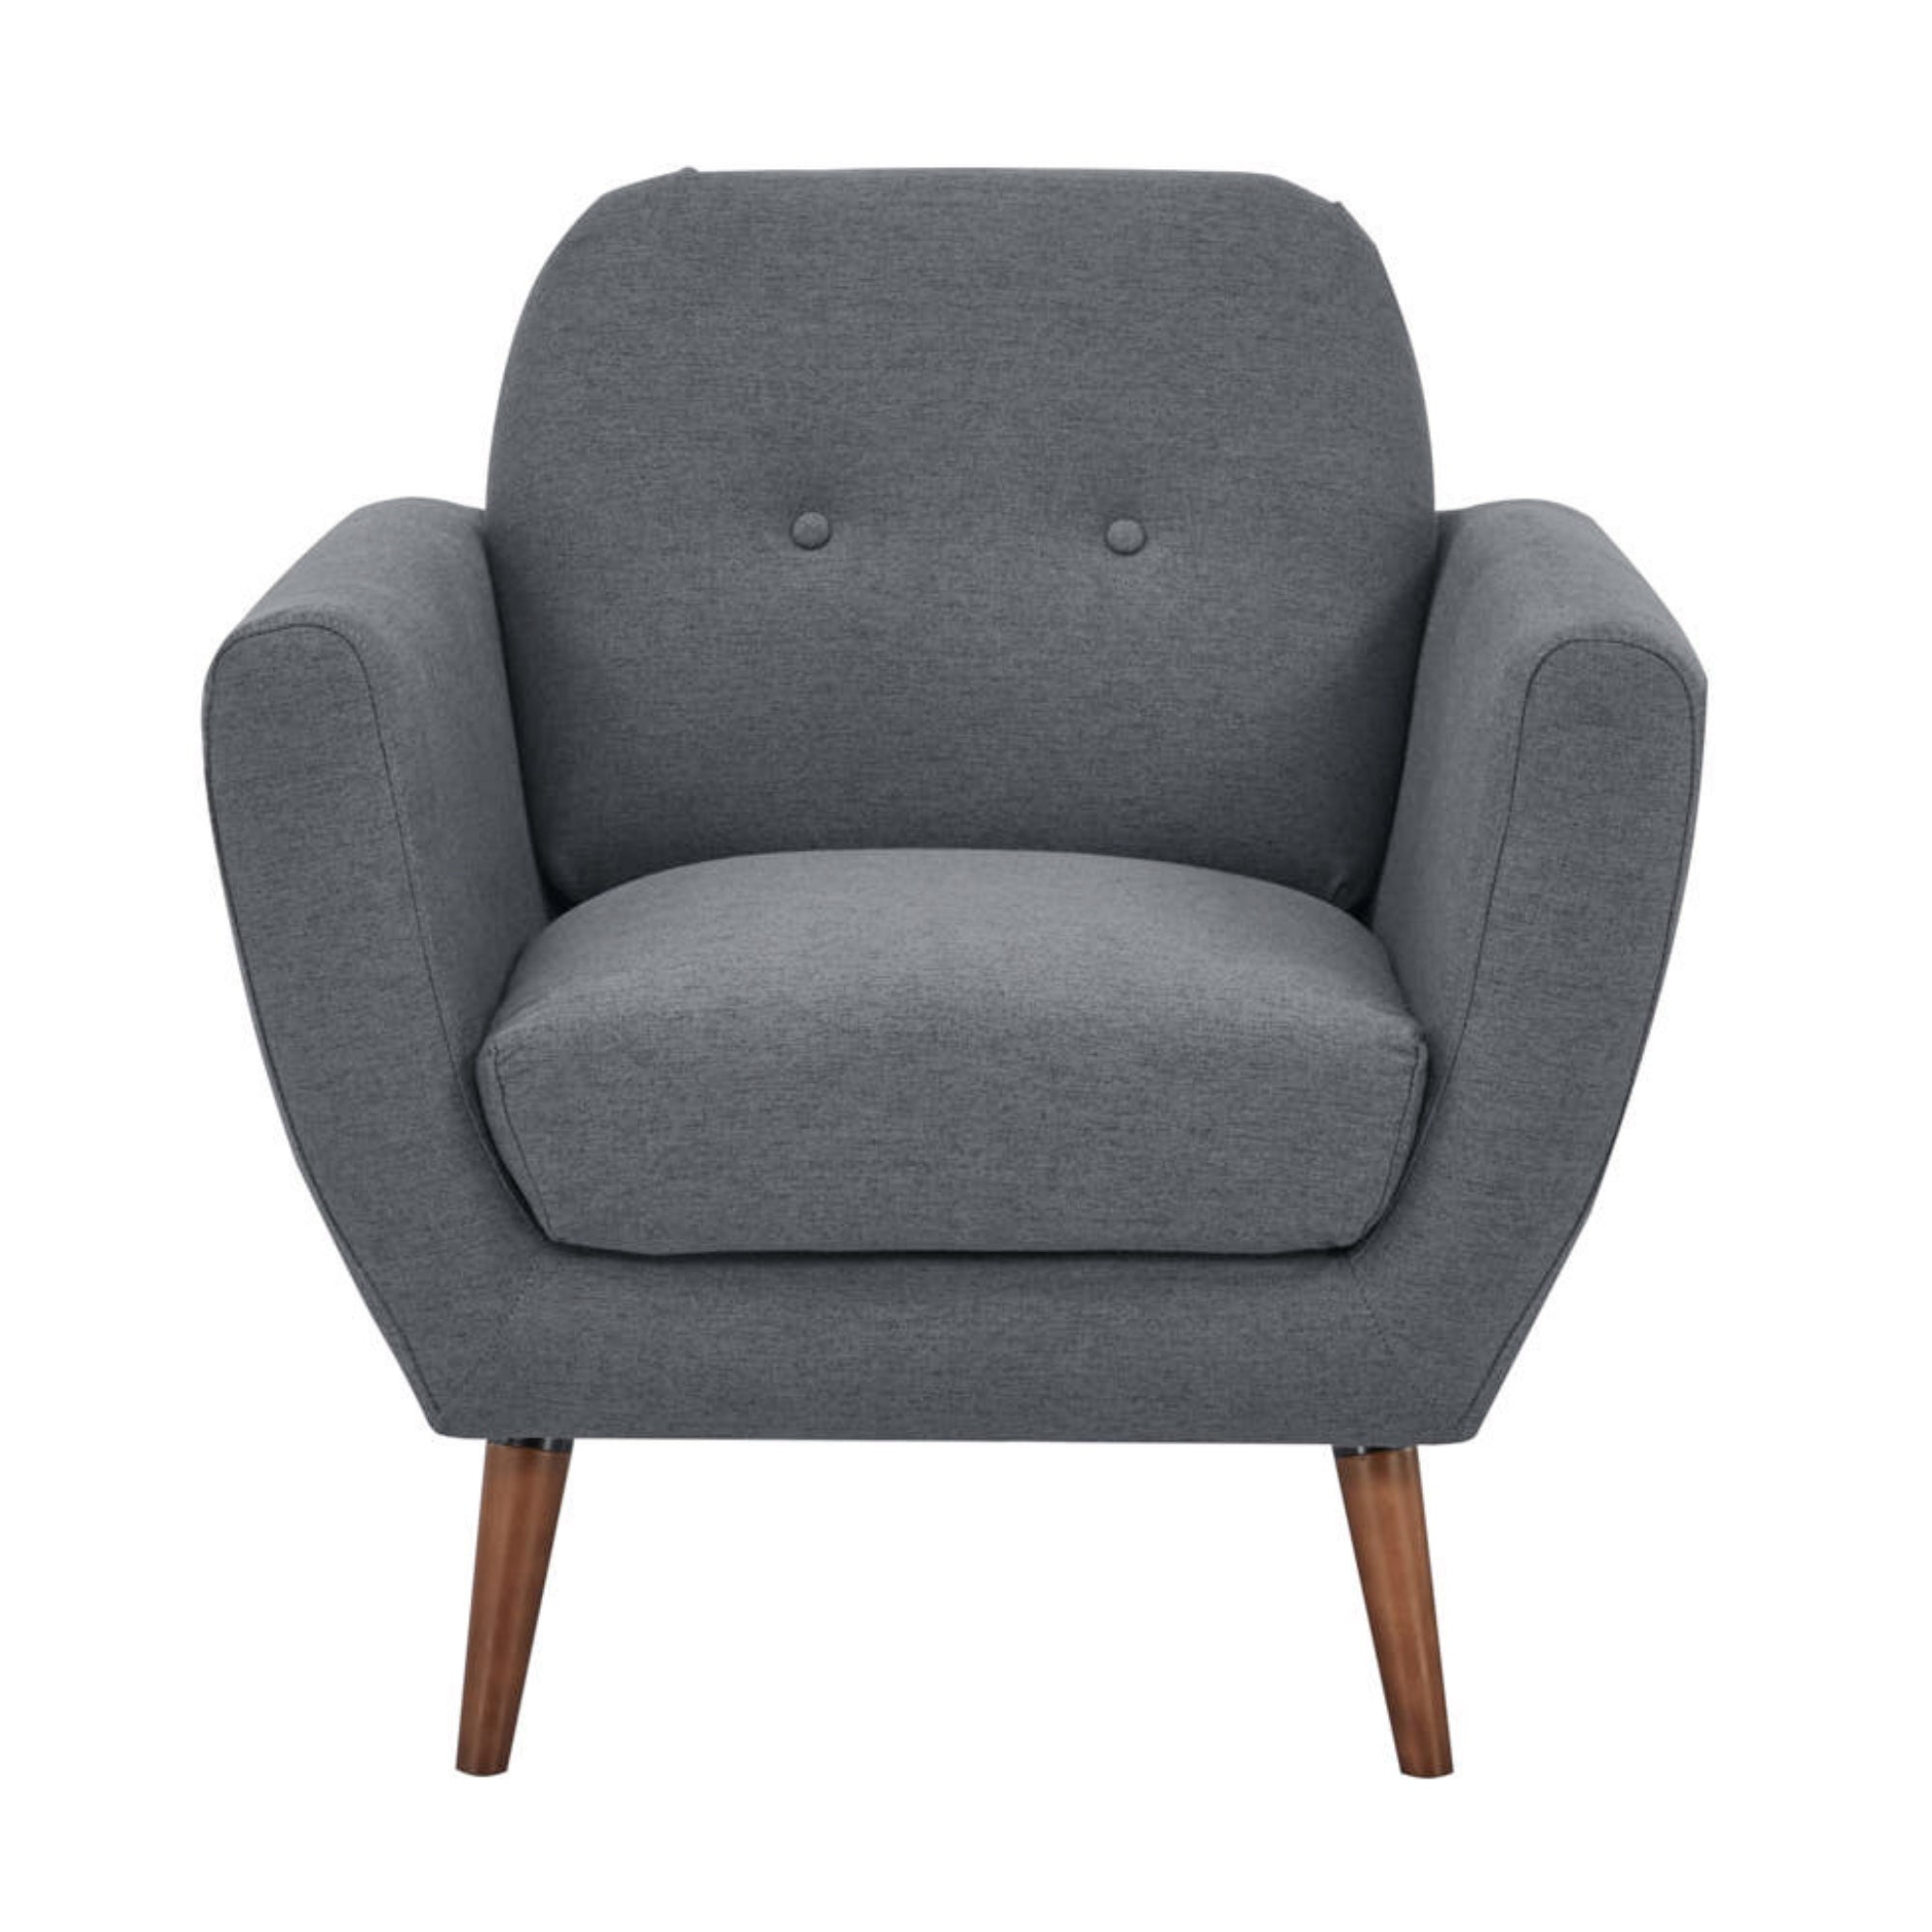 Dark Grey Fabric Upholstered Arm Chair, Foam Seat, Wooden Frame